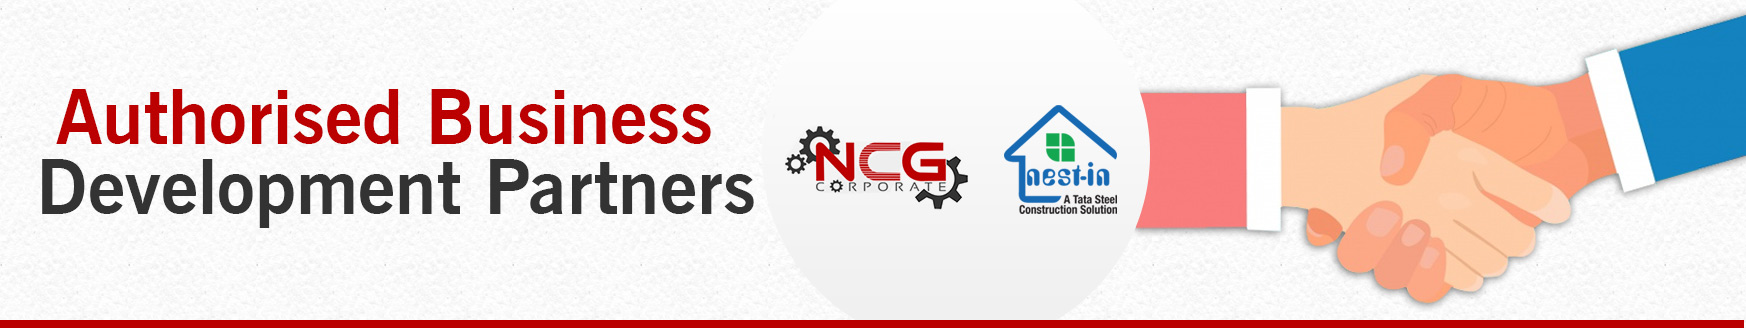 Ncgcorporate Steel Construction Solutions